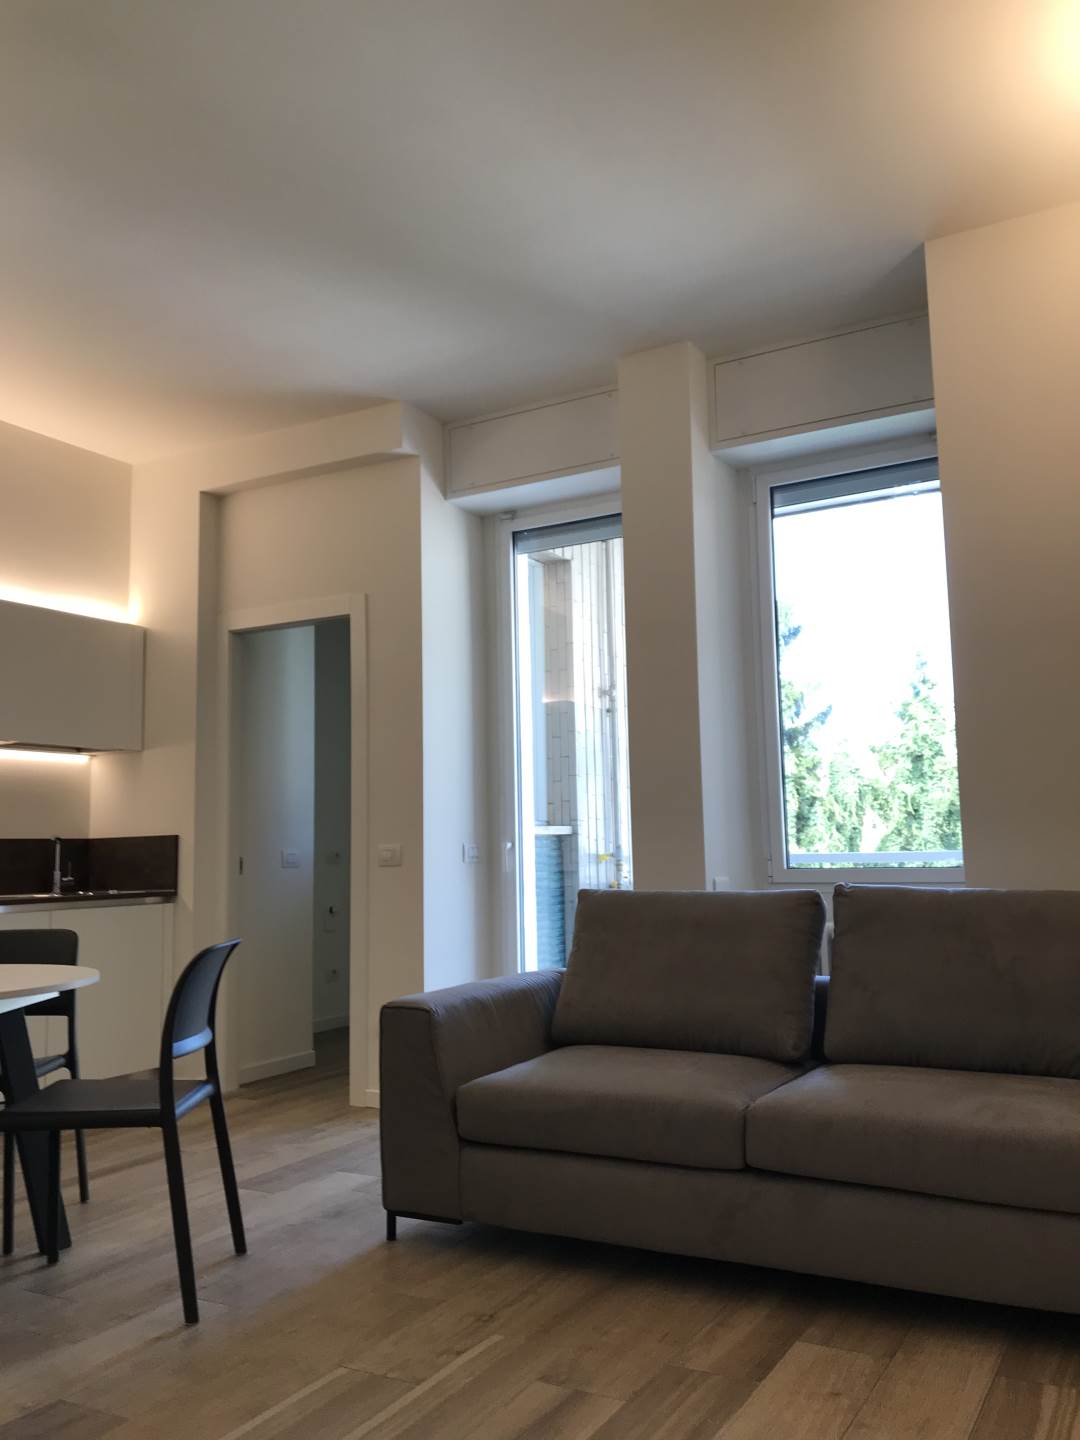 MAGGIOLINA, MILANO, Apartment for sale of 59 Sq. mt., Restored, Heating Centralized, Energetic class: D, placed at 2° on 4, composed by: 2 Rooms, Show cooking, , 1 Bedroom, 1 Bathroom, Elevator, 